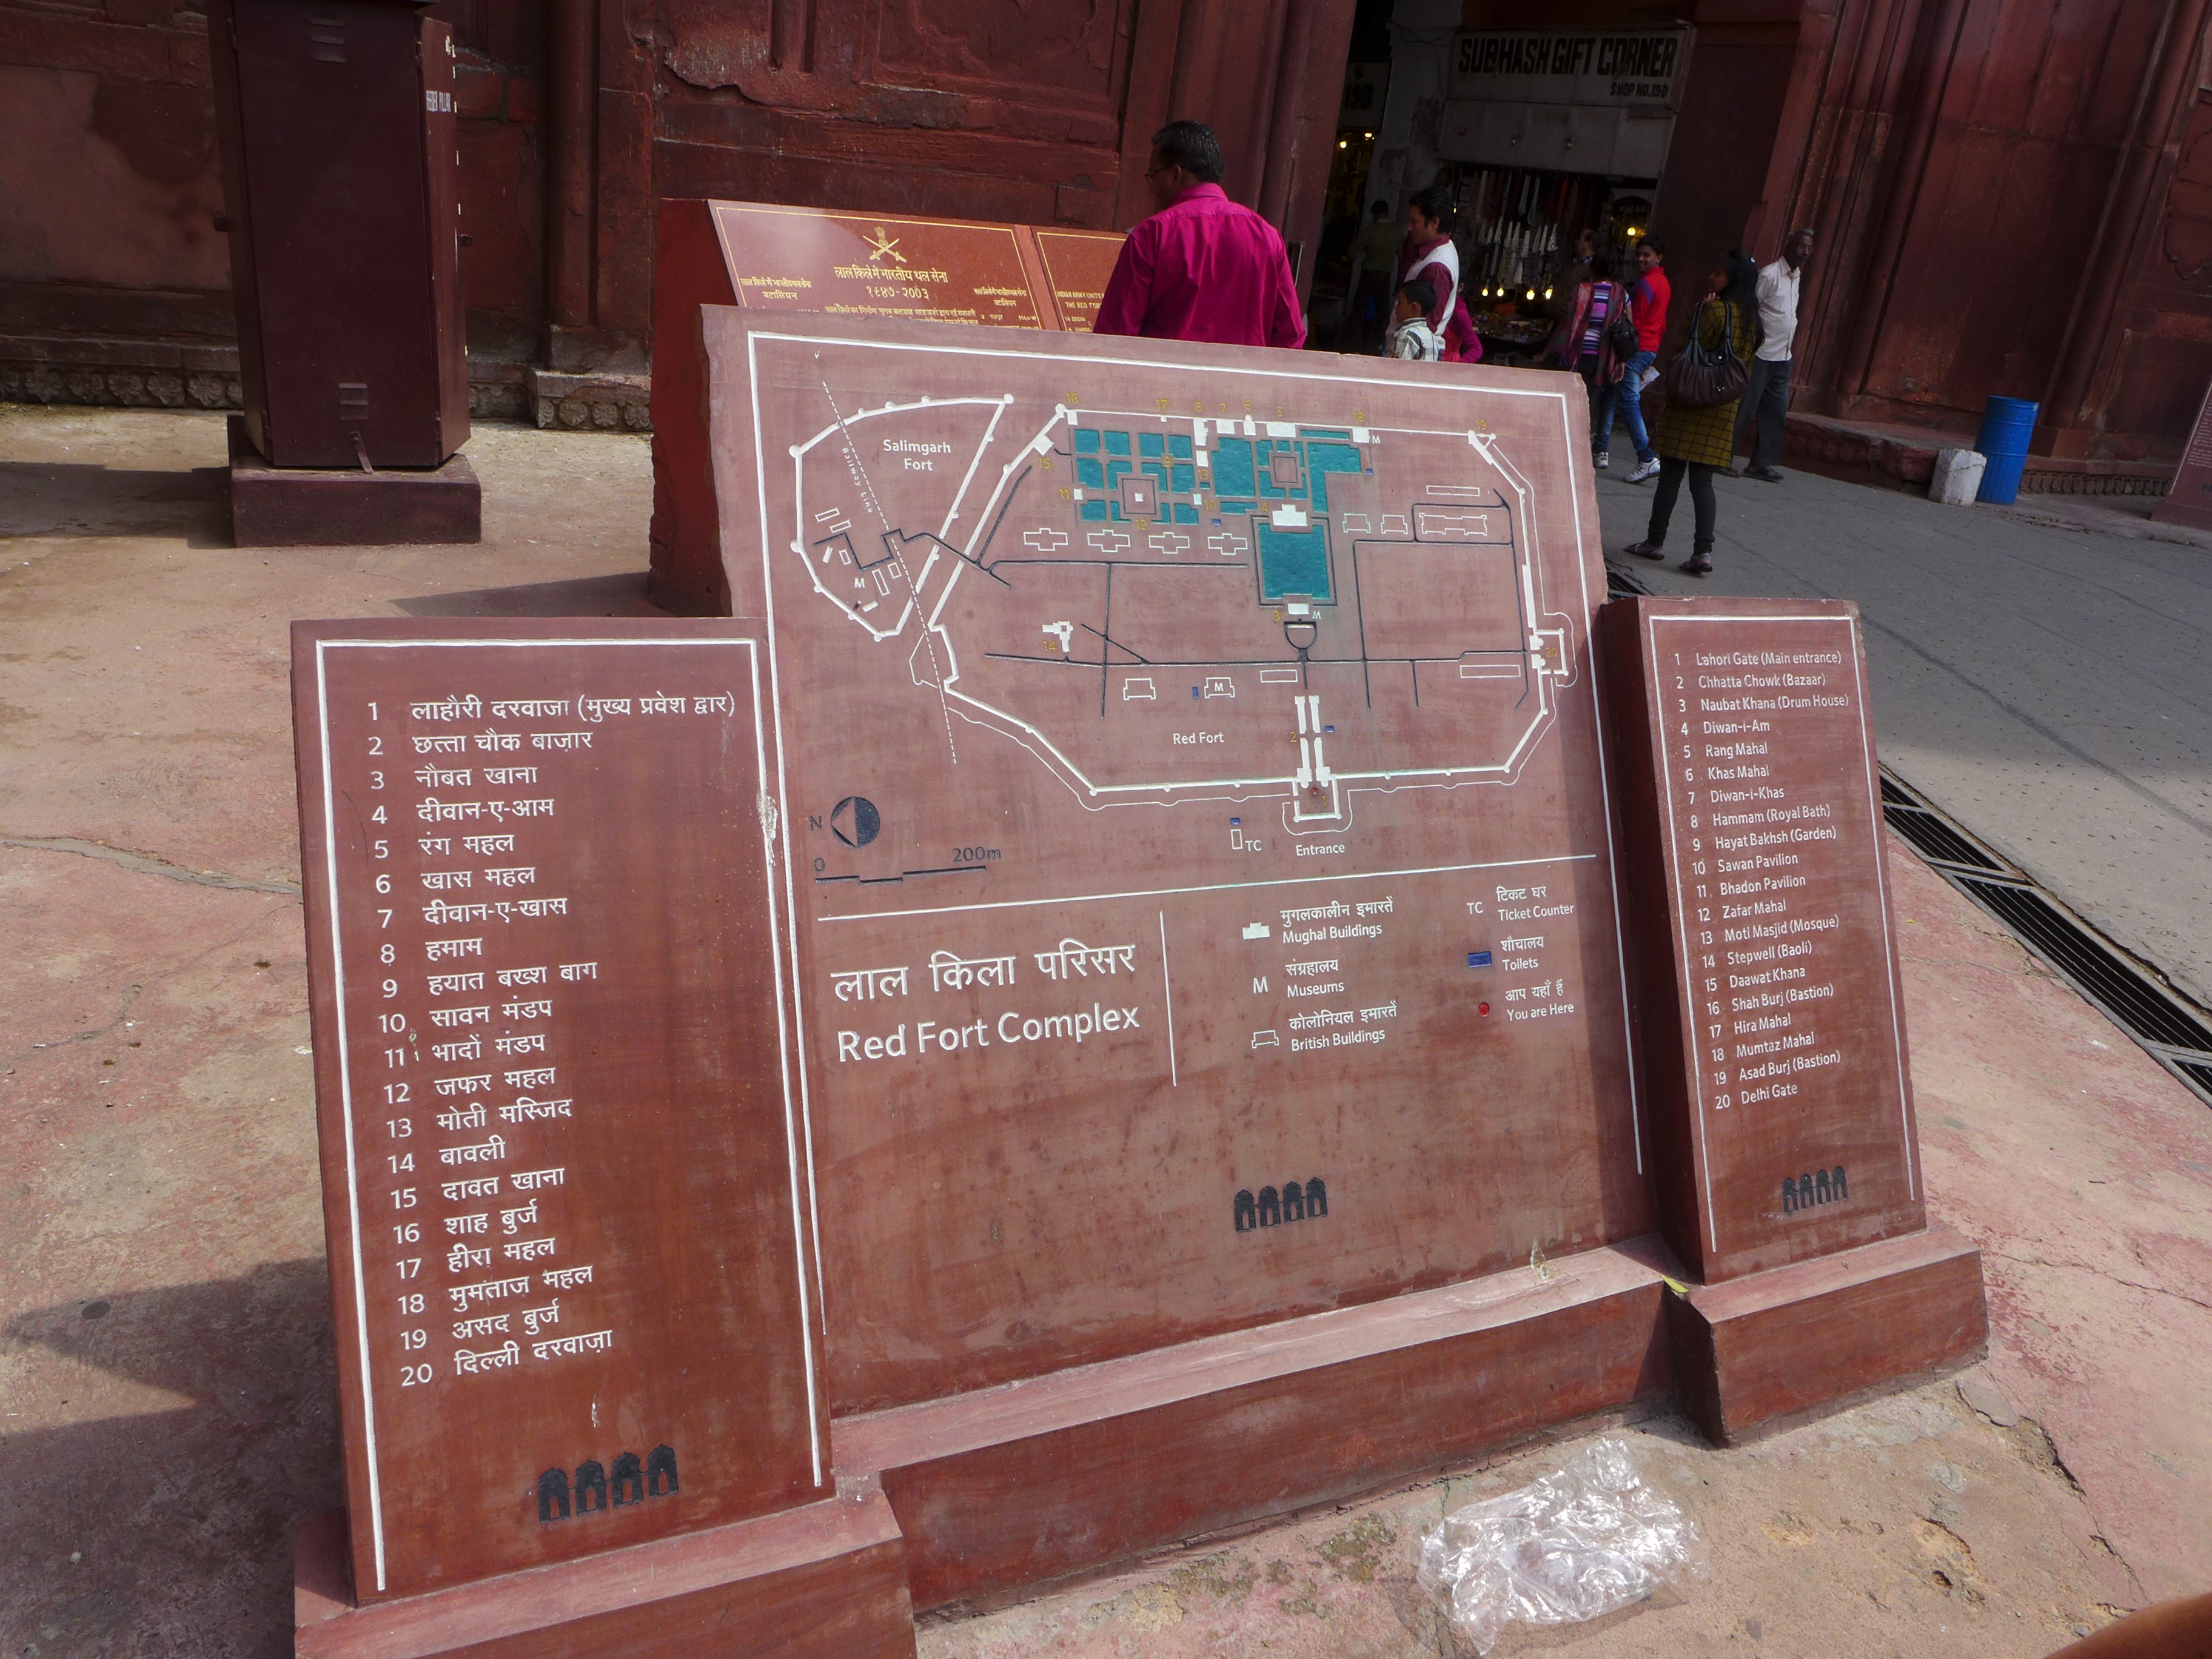 Take a good look, this is the only map you'll see of the Red Fort layout. 